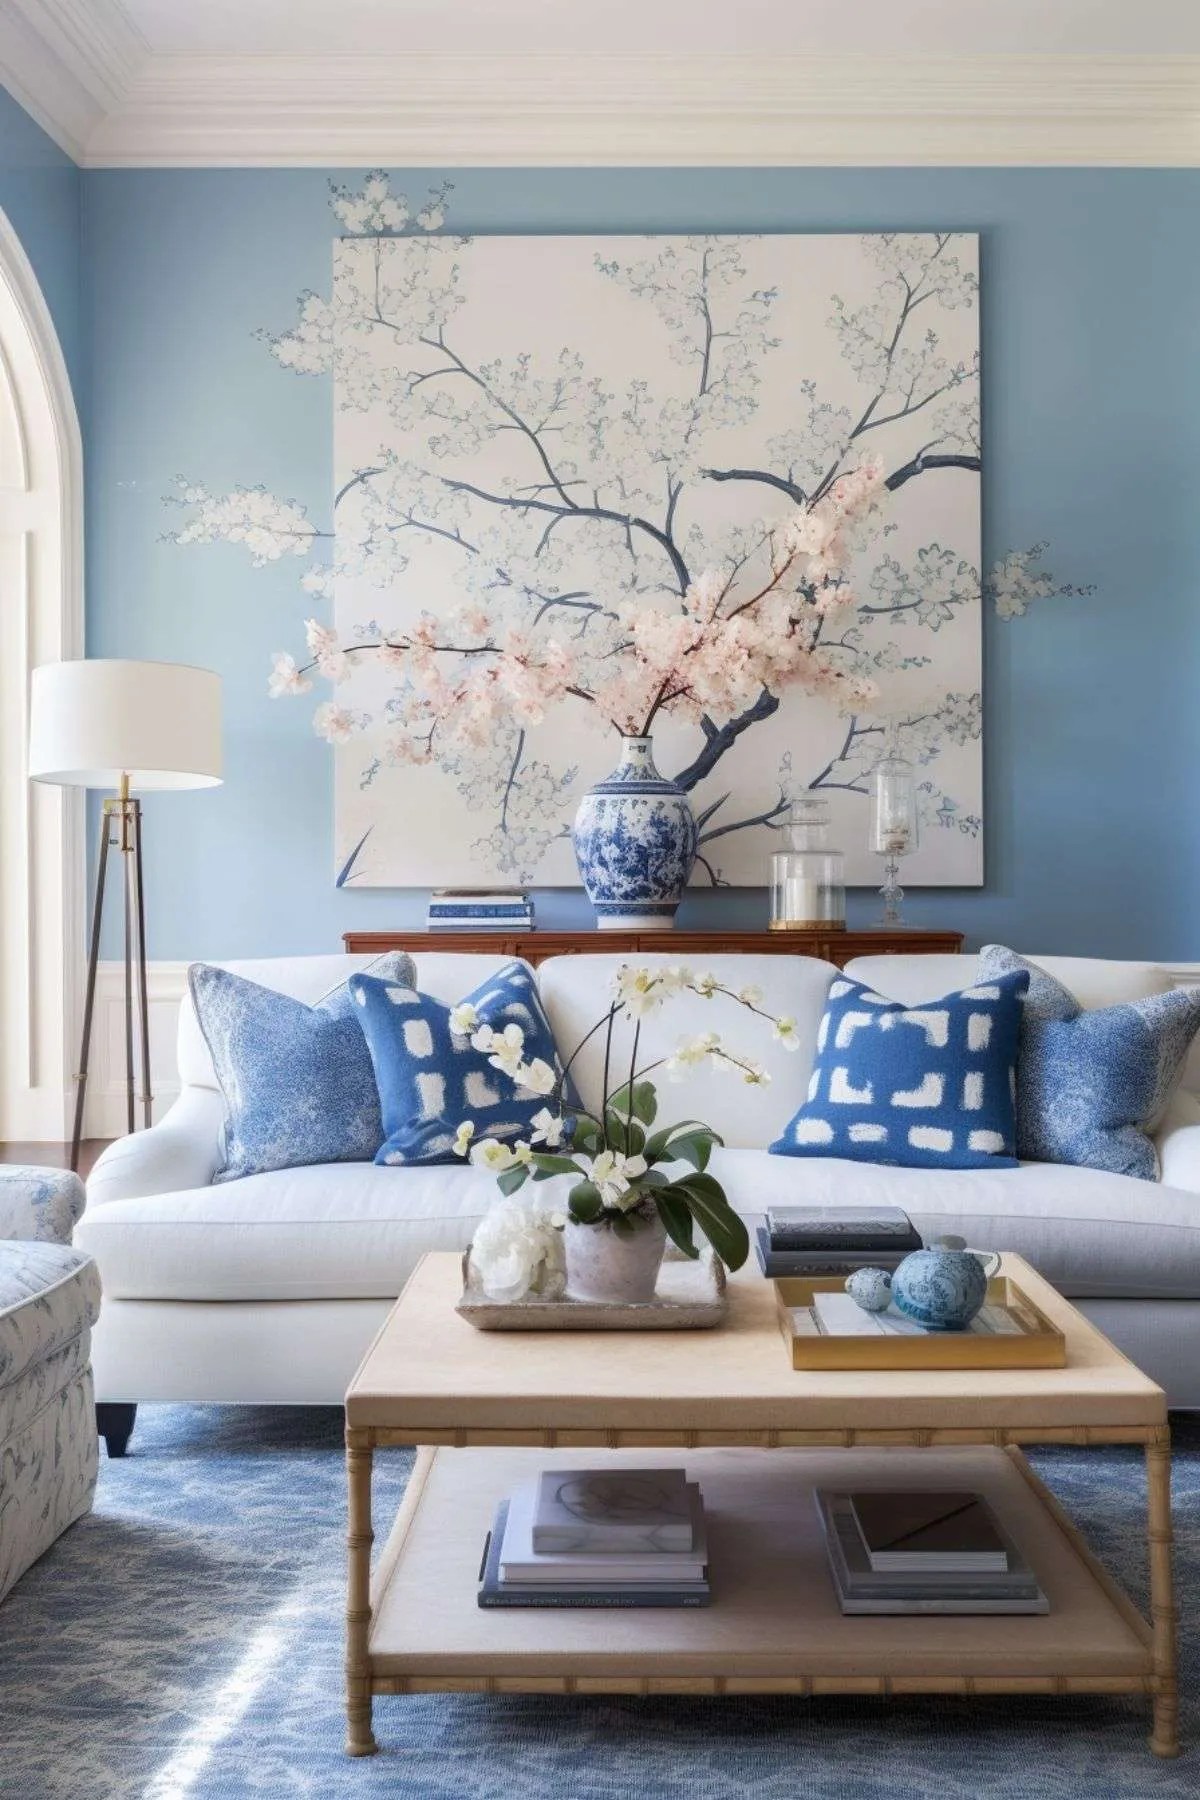 How to Style Cushions on Sofas: 5 Ways to Help Enhance The Look of Your Living Room